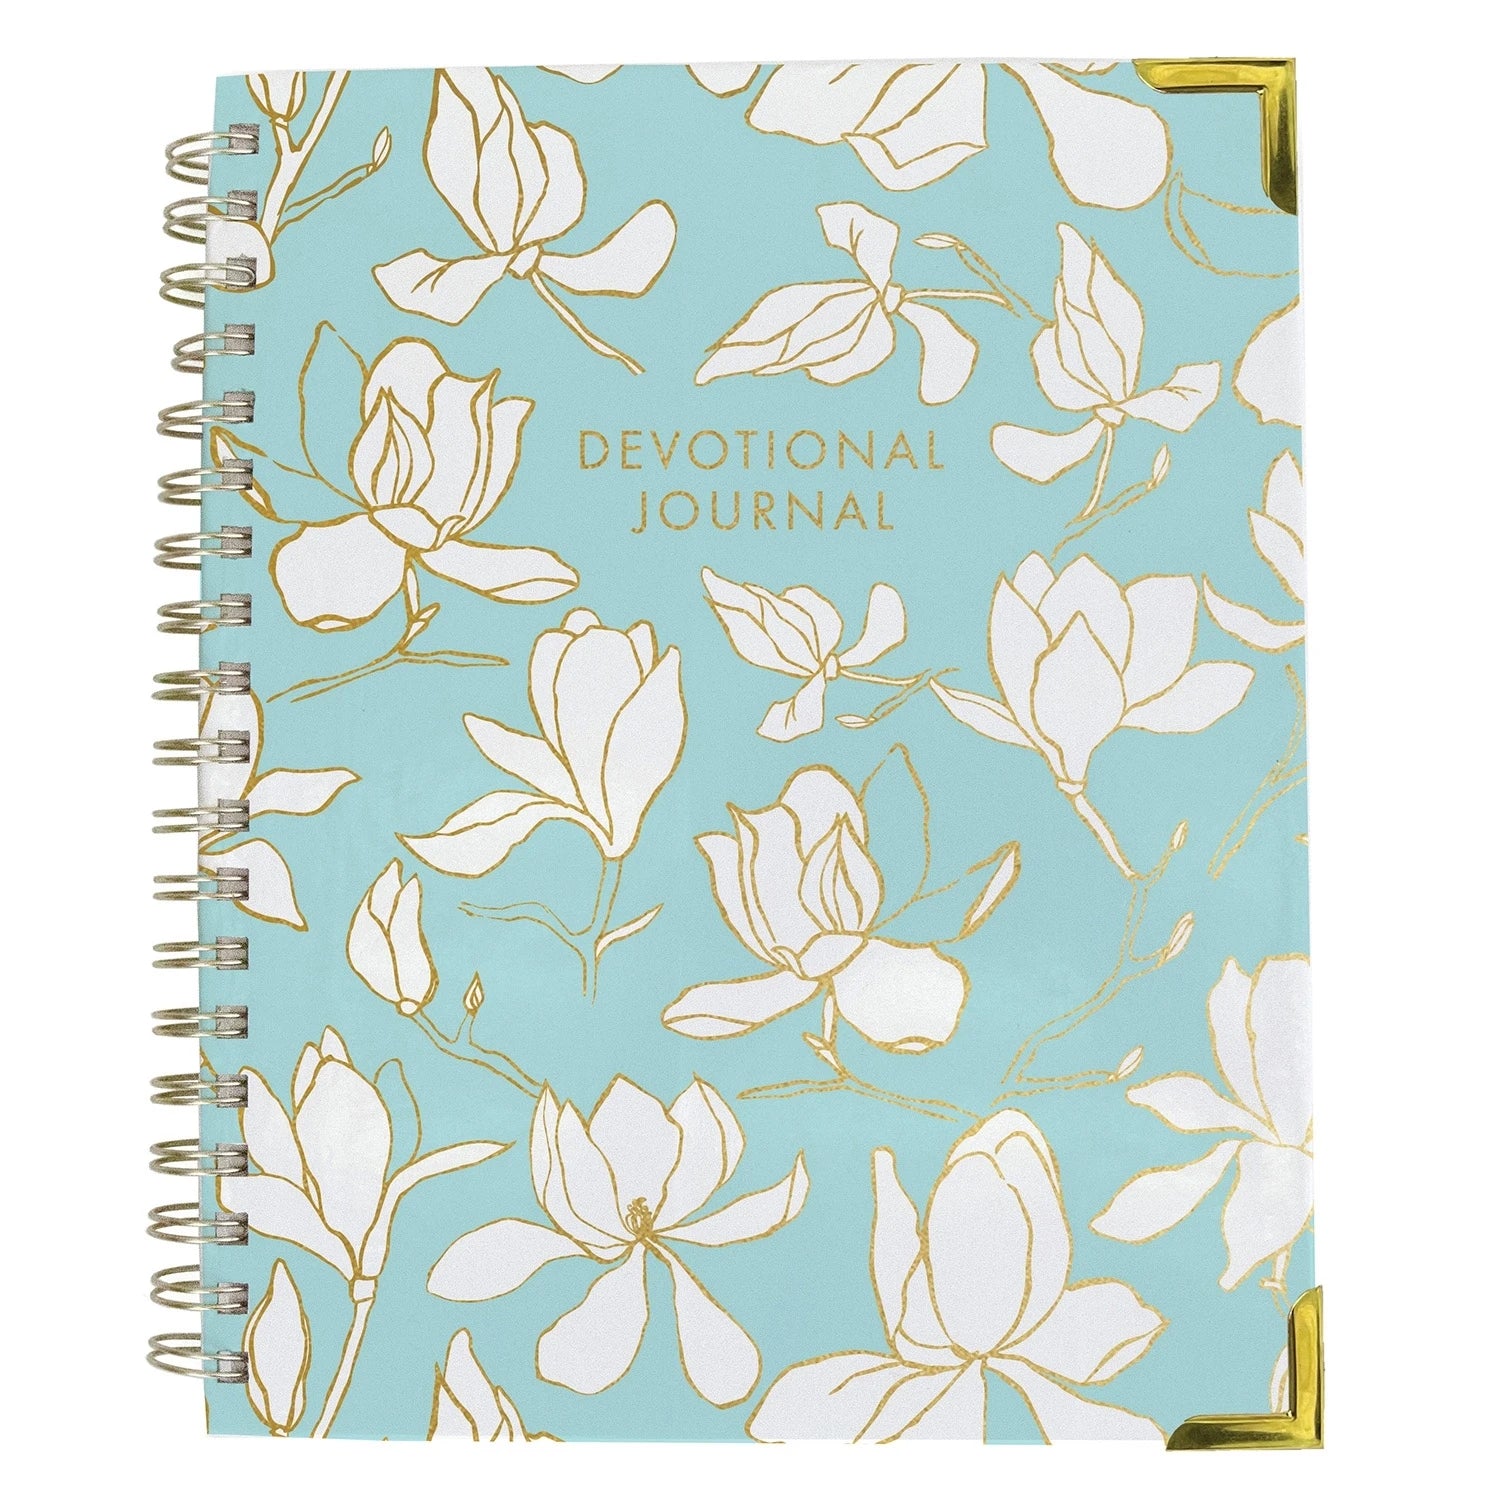 Mary Square Journal Devotional Magnolia